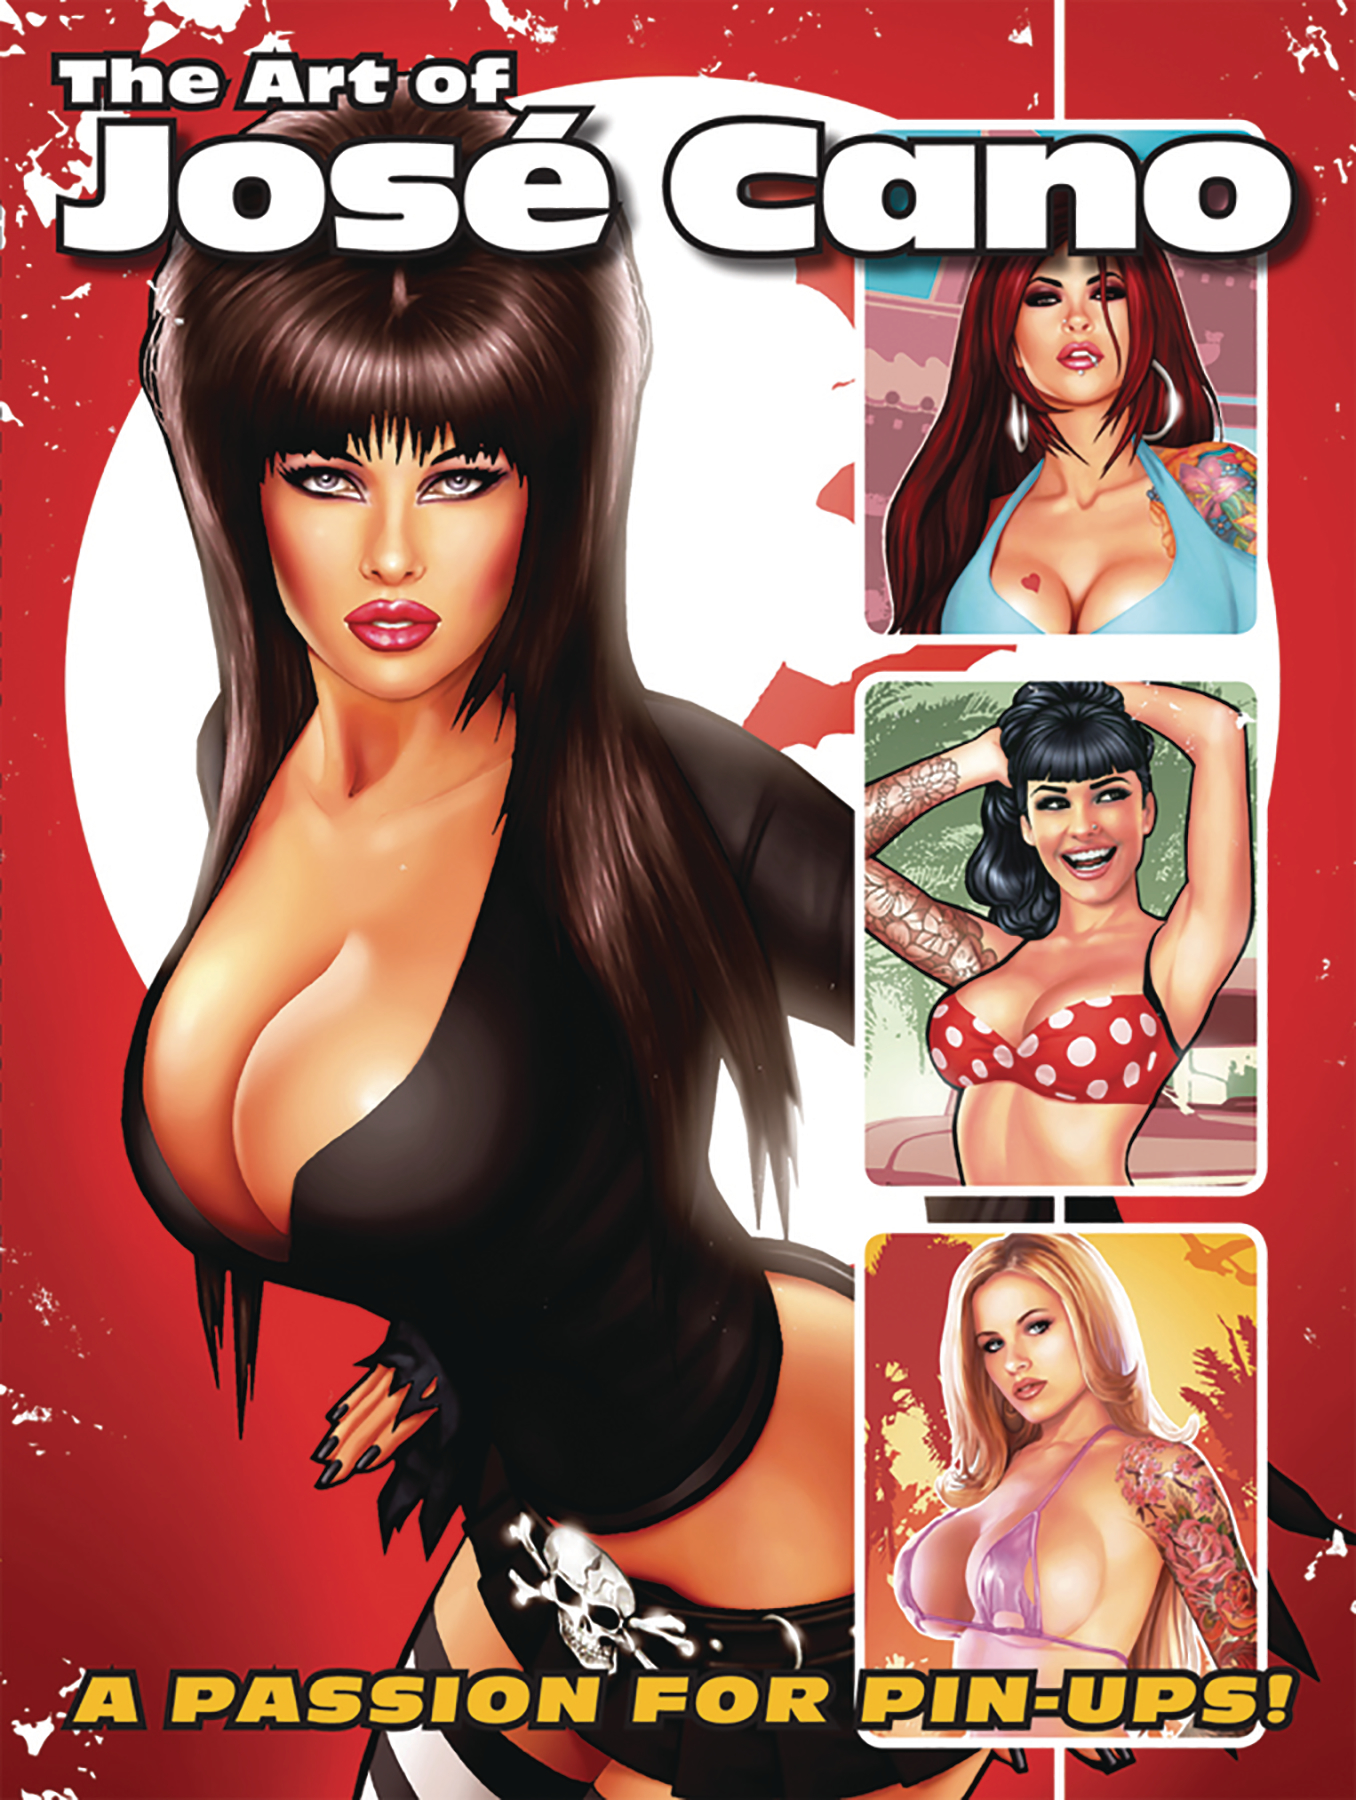 Art of Jose Cano Passion For Pin Ups Soft Cover (Mature)